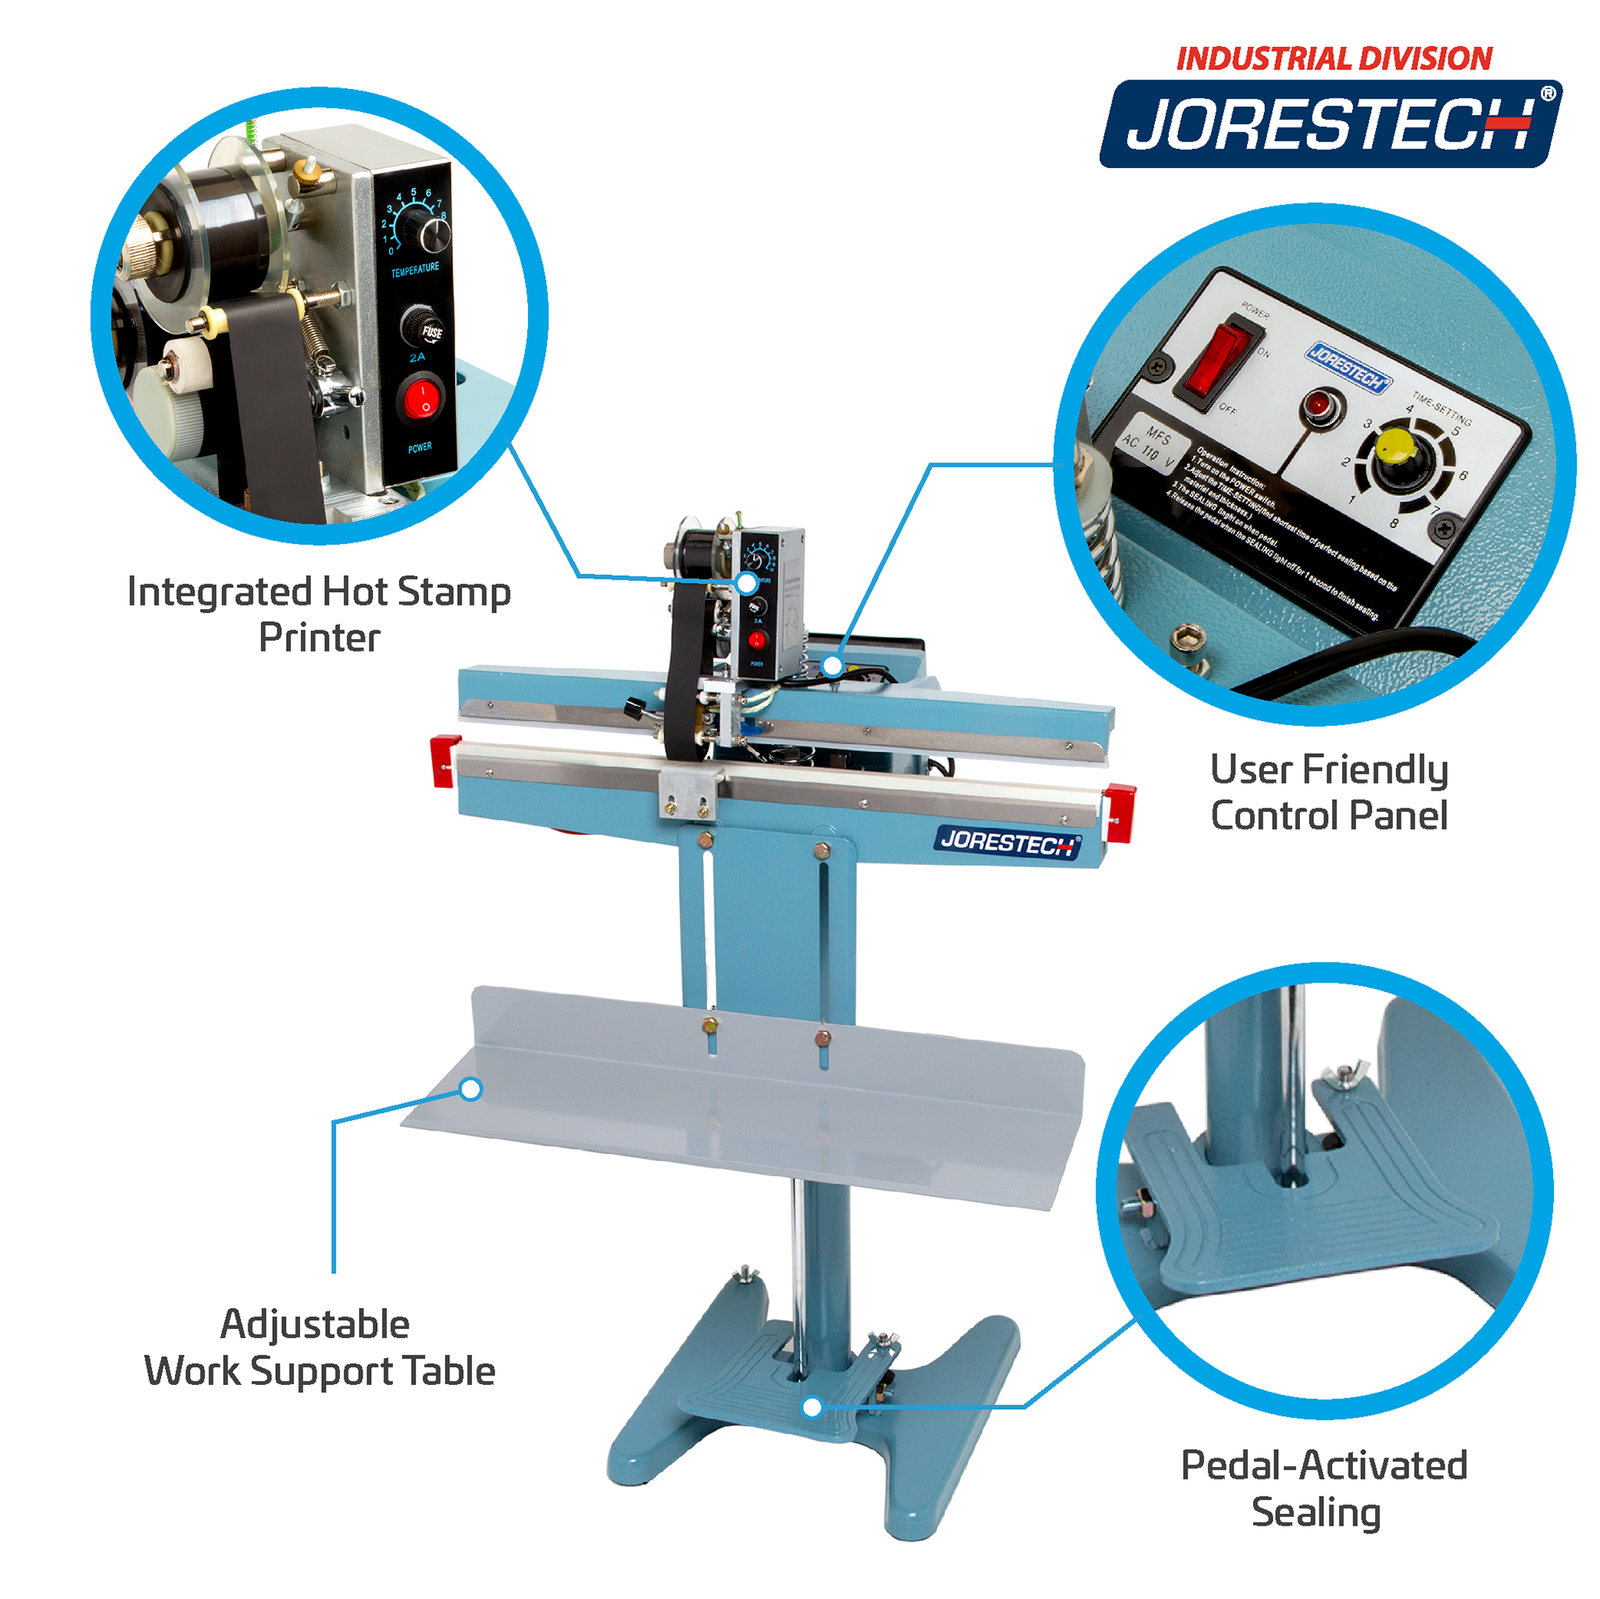 Infographic shows blue JORESTECH foot impulse bag sealer over white background. Highlighted features include, Integrated Hot Stamp Printer, User Friendly Control Panel, Pedal-Activated Sealing, and Adjustable Work Support Table. Close-ups of a hot stamp printer, foot pedal, and control panel.